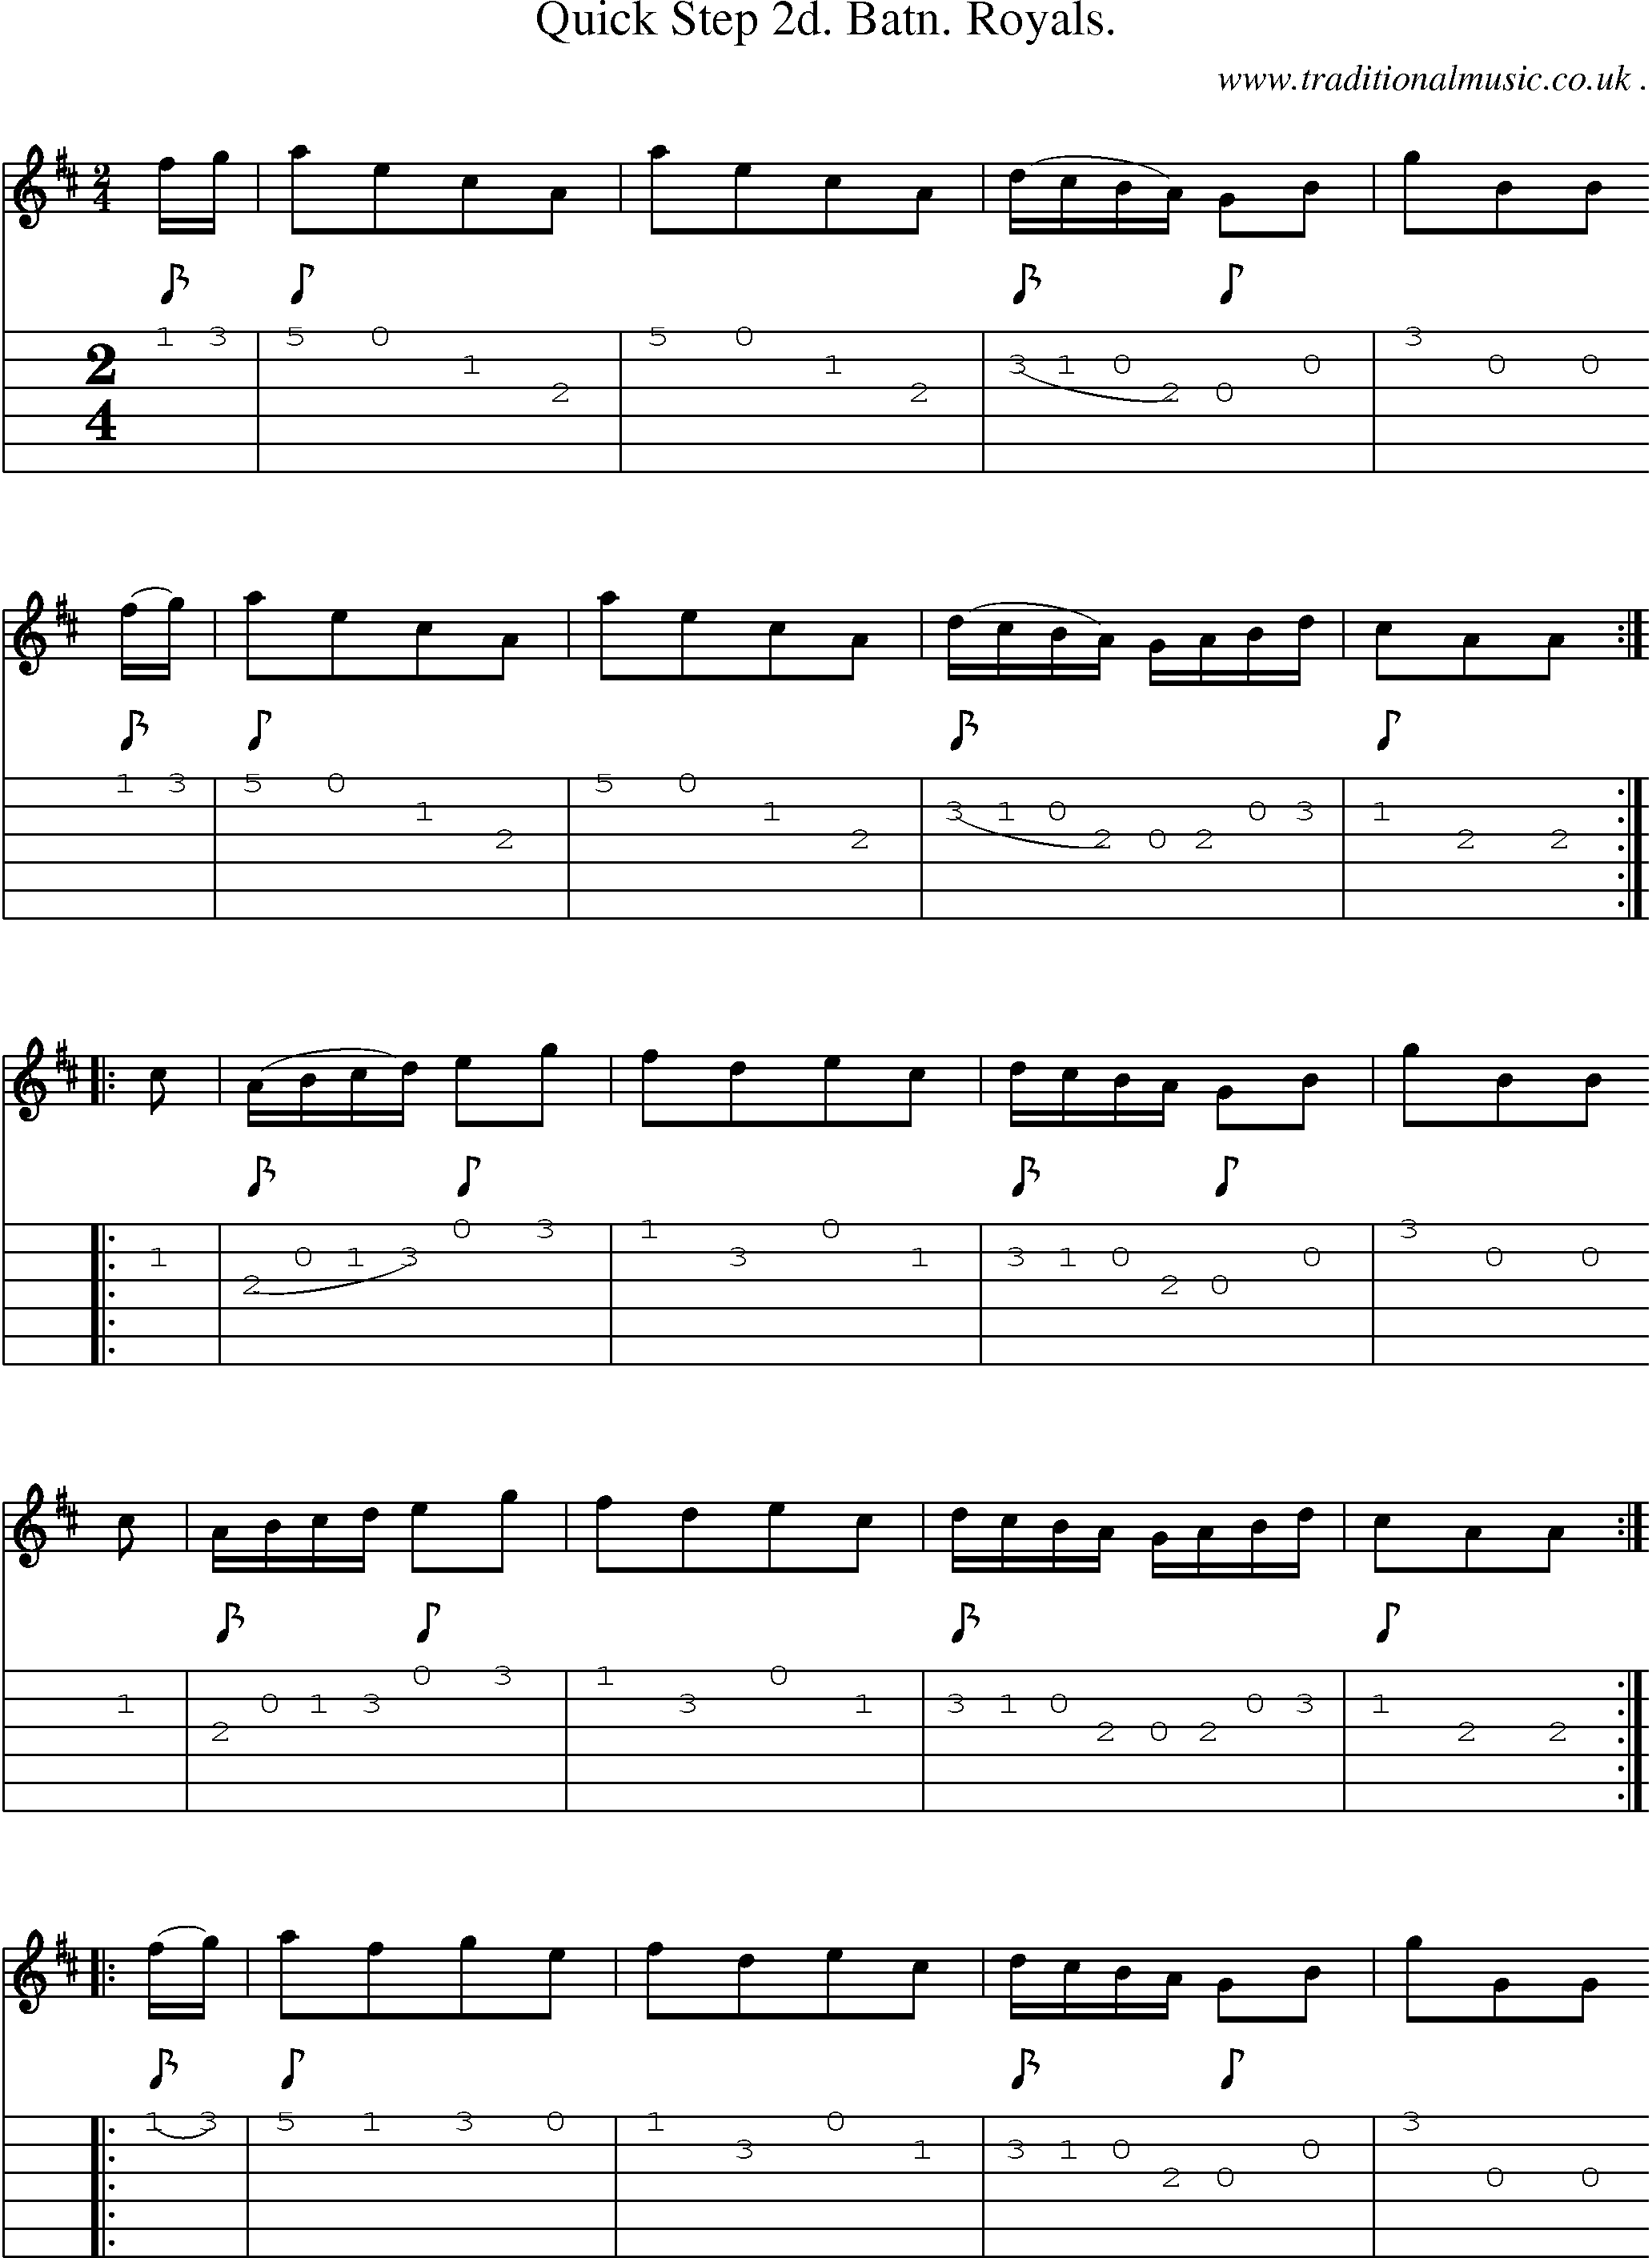 Sheet-Music and Guitar Tabs for Quick Step 2d Batn Royals